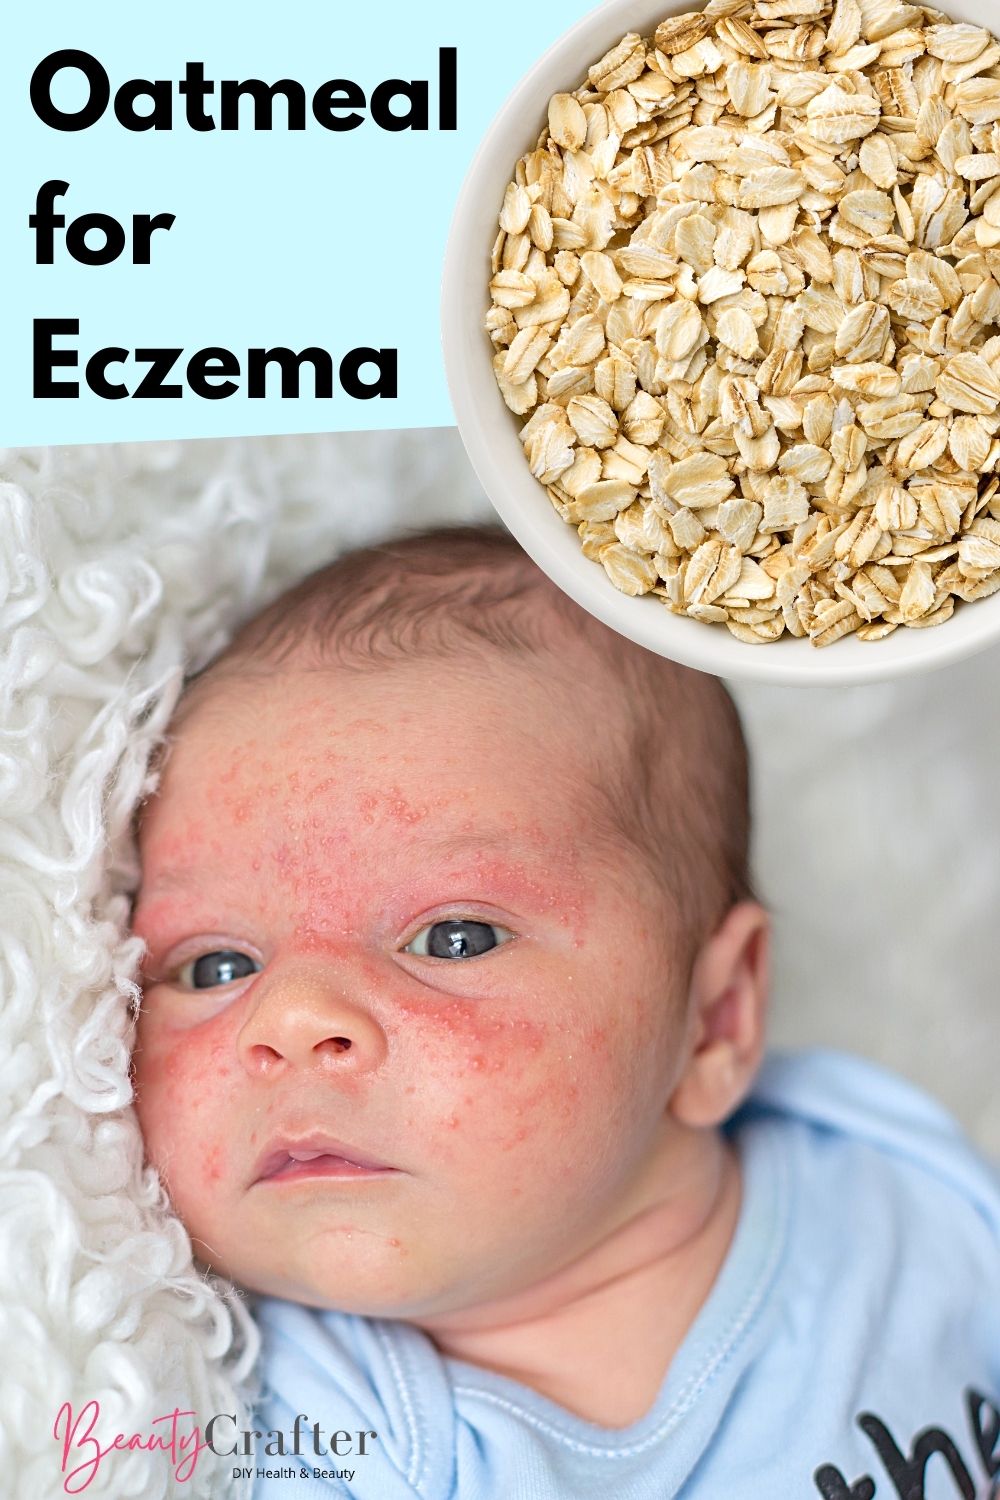 Ask the experts: colloidal oatmeal and baby eczema